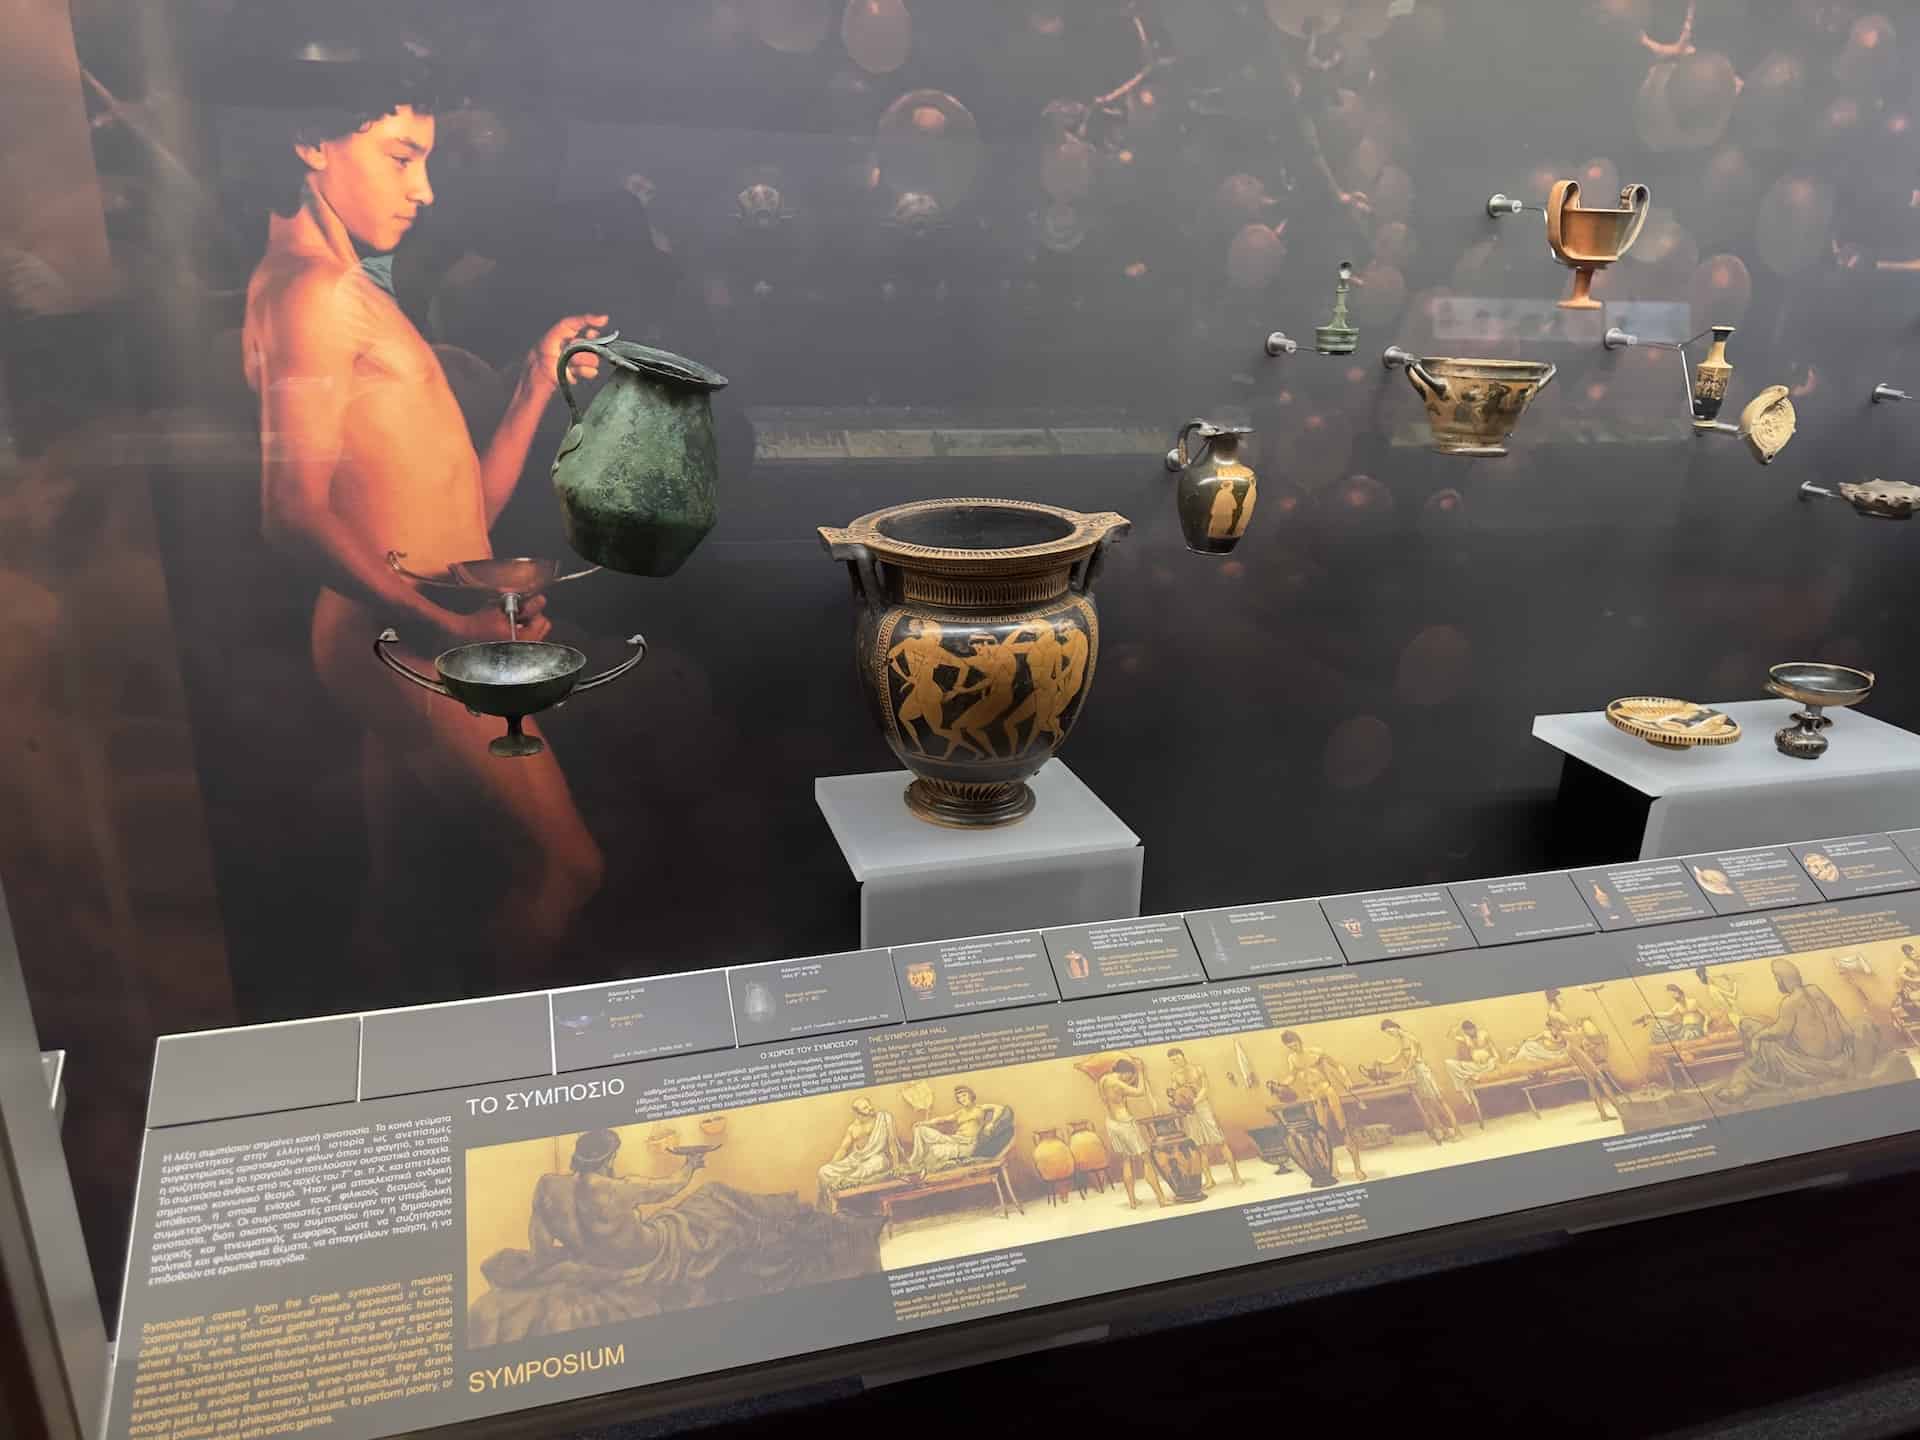 Symposium in Scenes from Daily Life in Antiquity at the Museum of Cycladic Art in Athens, Greece